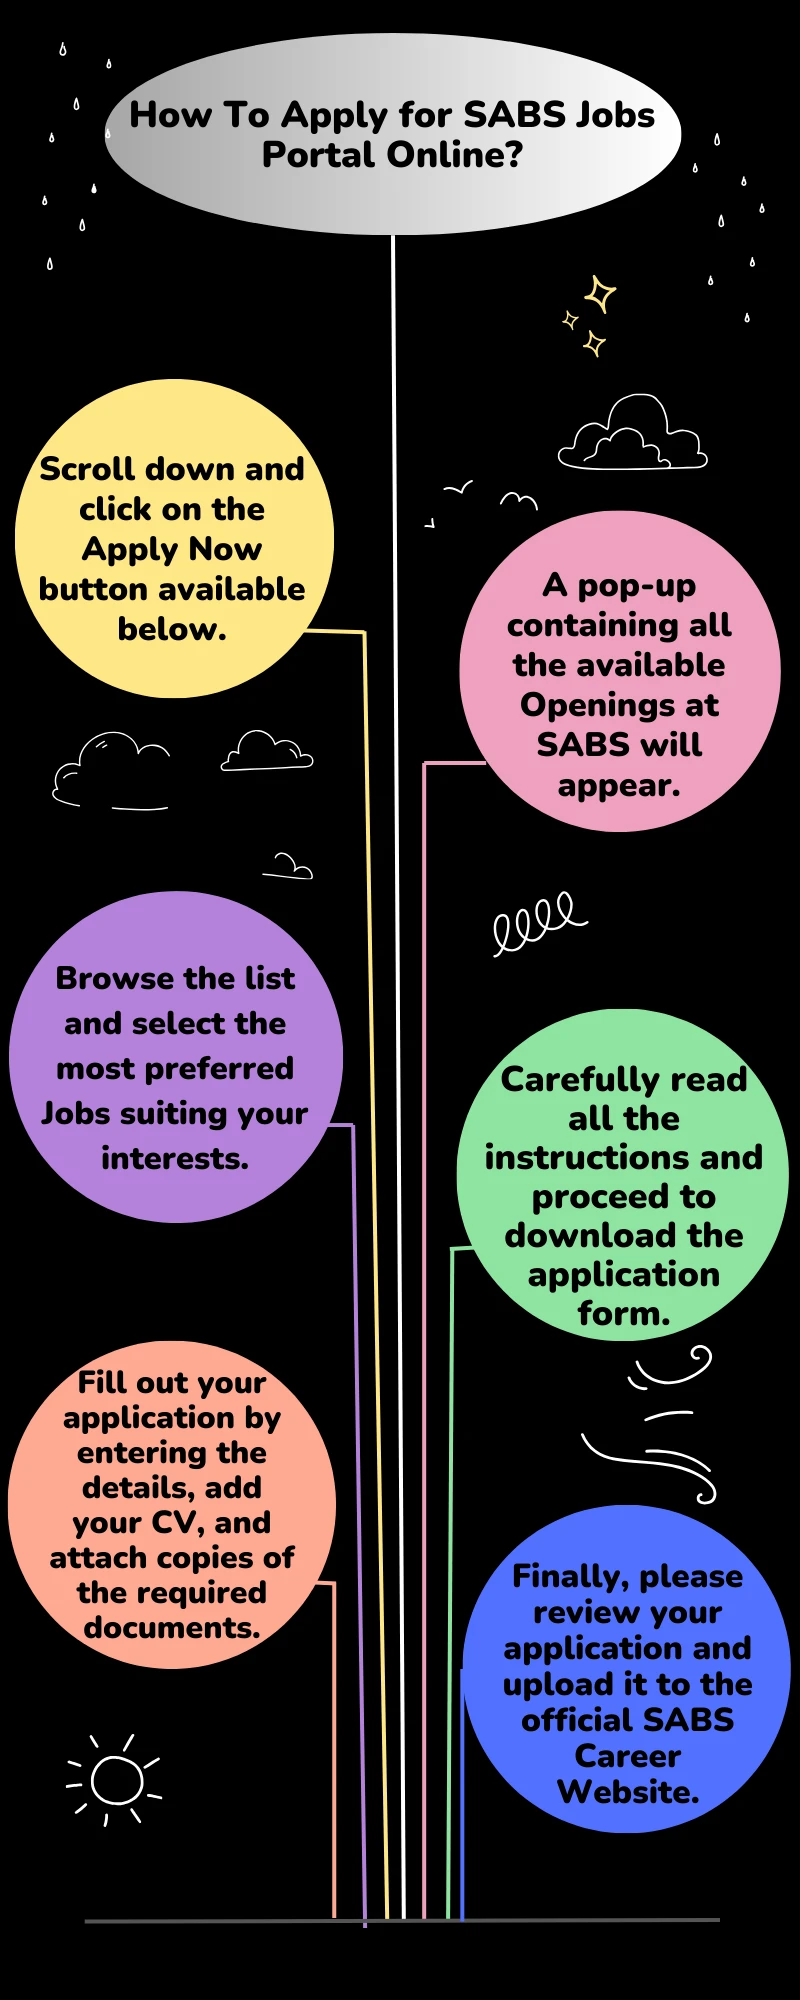 How To Apply for SABS Jobs Portal Online?